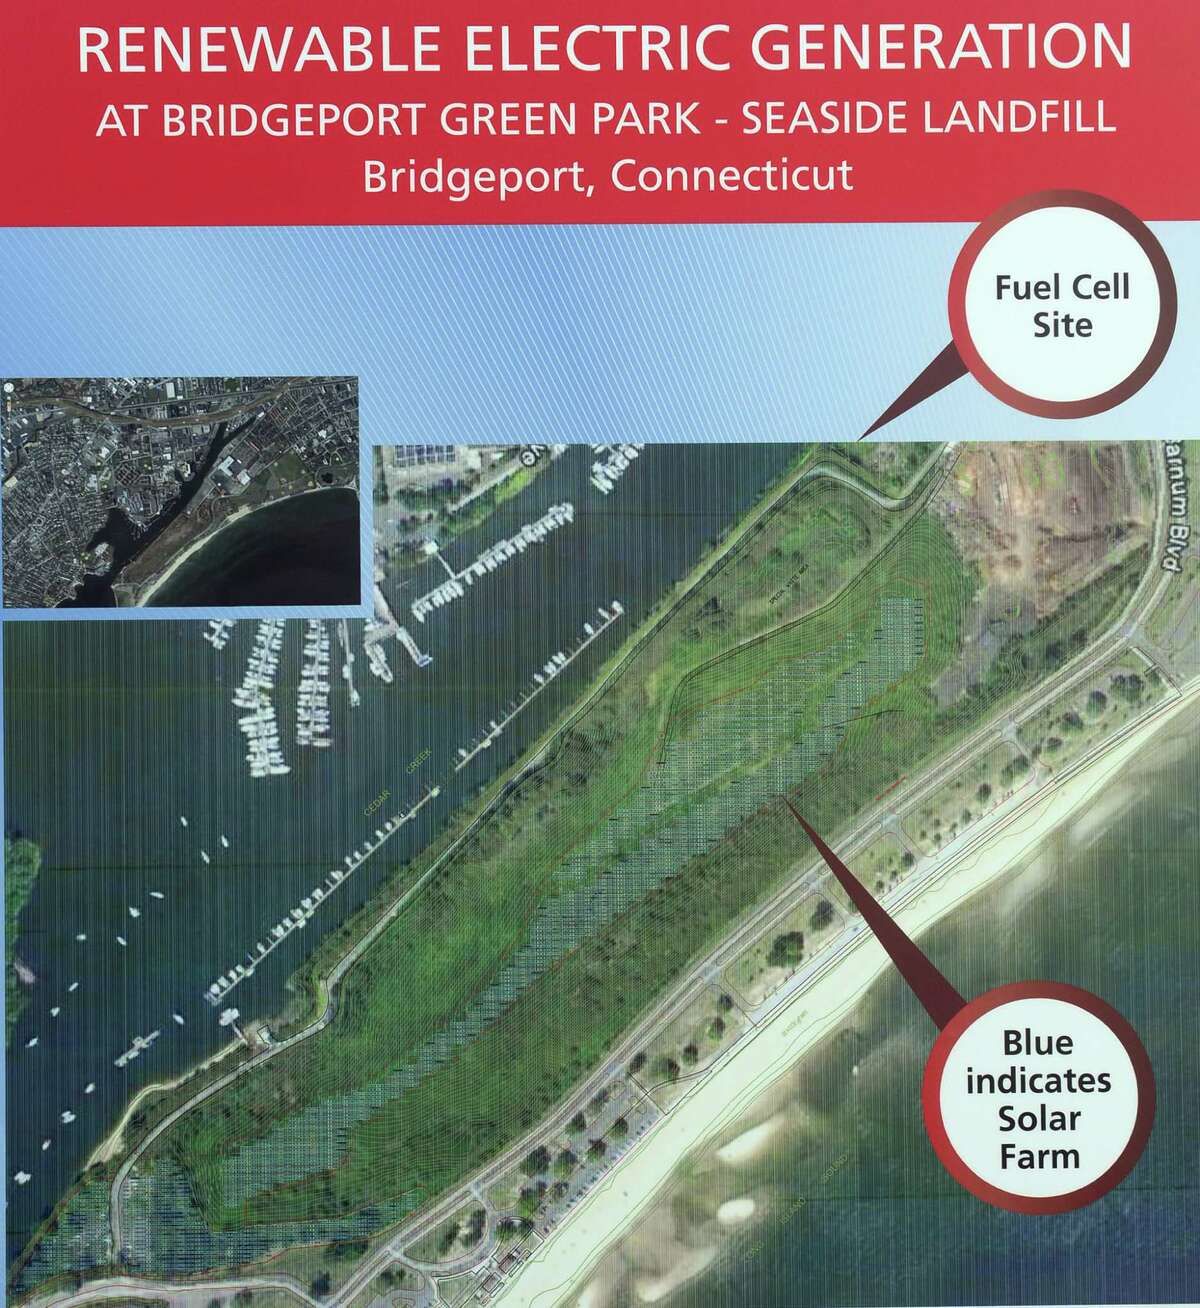 A graphic showing the planned Bridgeport Green Park at Seaside Landfill in Bridgeport, Conn.